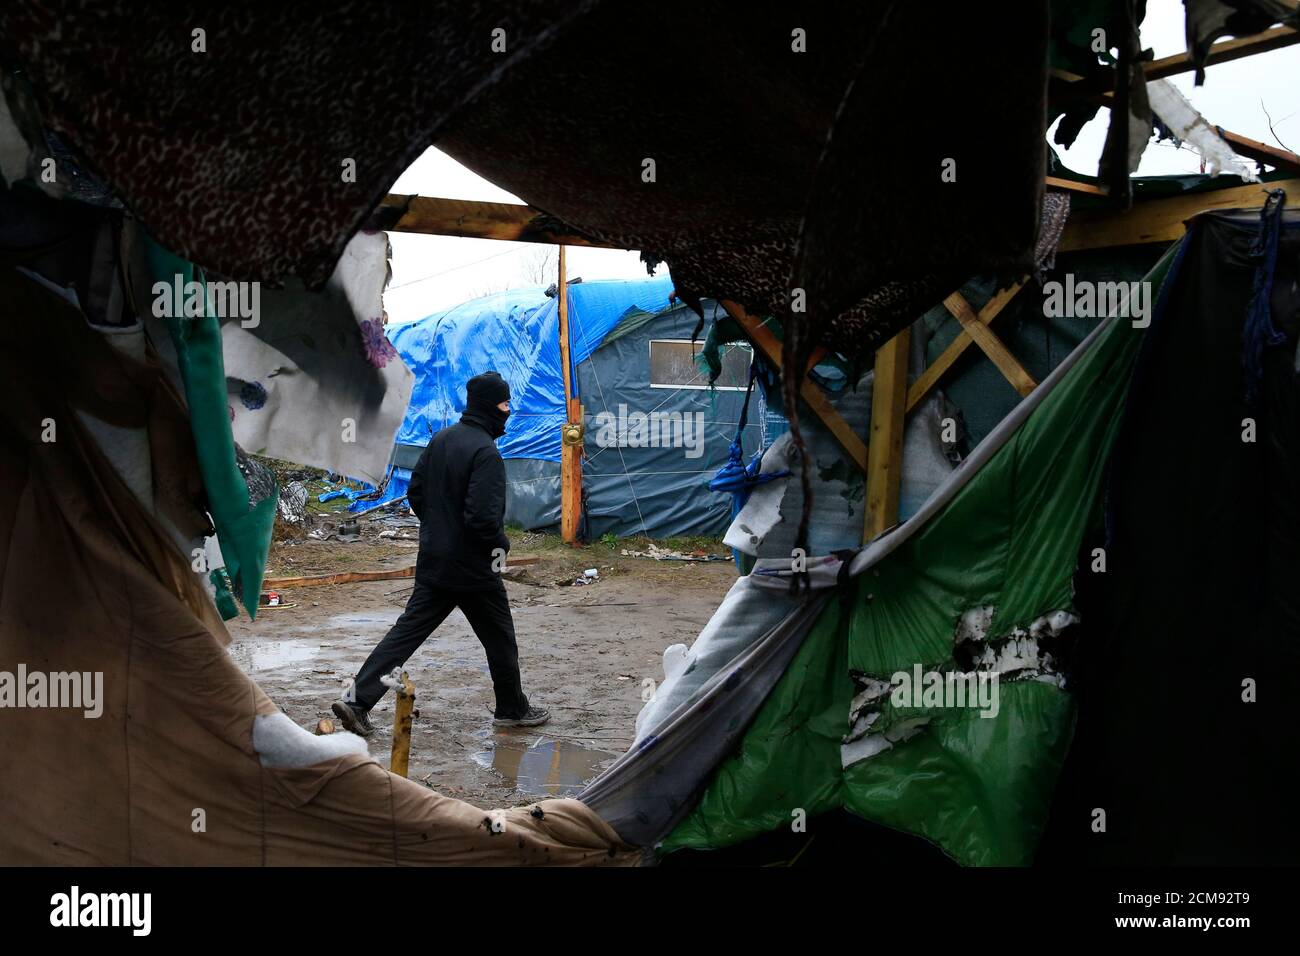 A migrant walks past makeshift shelters during the partial dismantelment of the camp for migrants called the 'Jungle' in Calais, France, March 1, 2016.   REUTERS/Pascal Rossignol Stock Photo